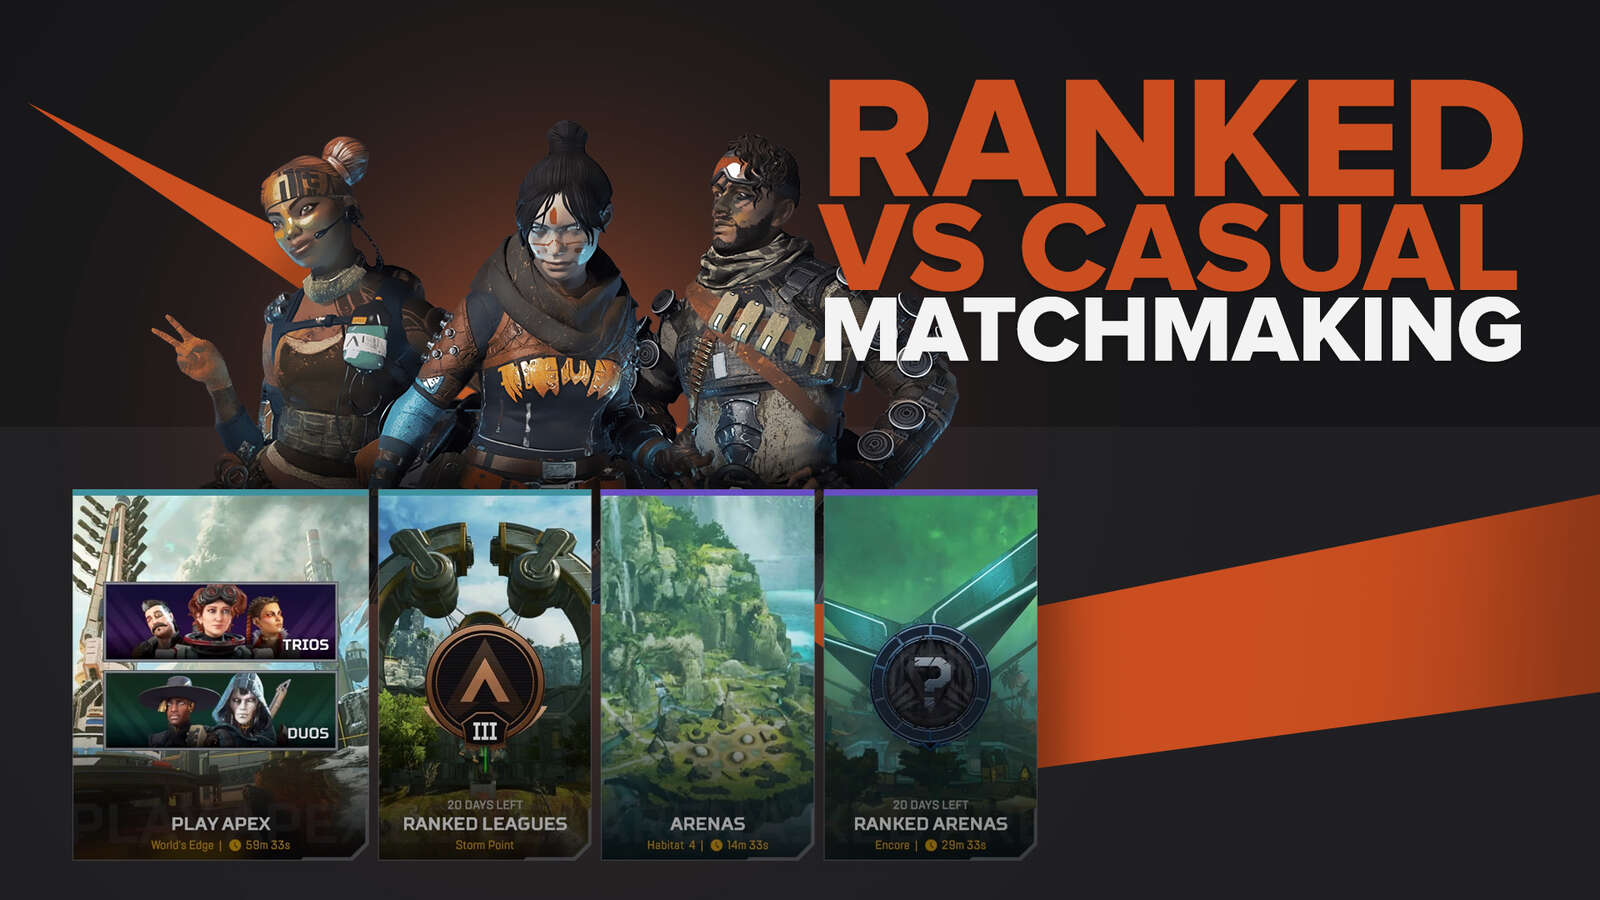 Ranked Vs Casual Matchmaking in Apex Legends explained